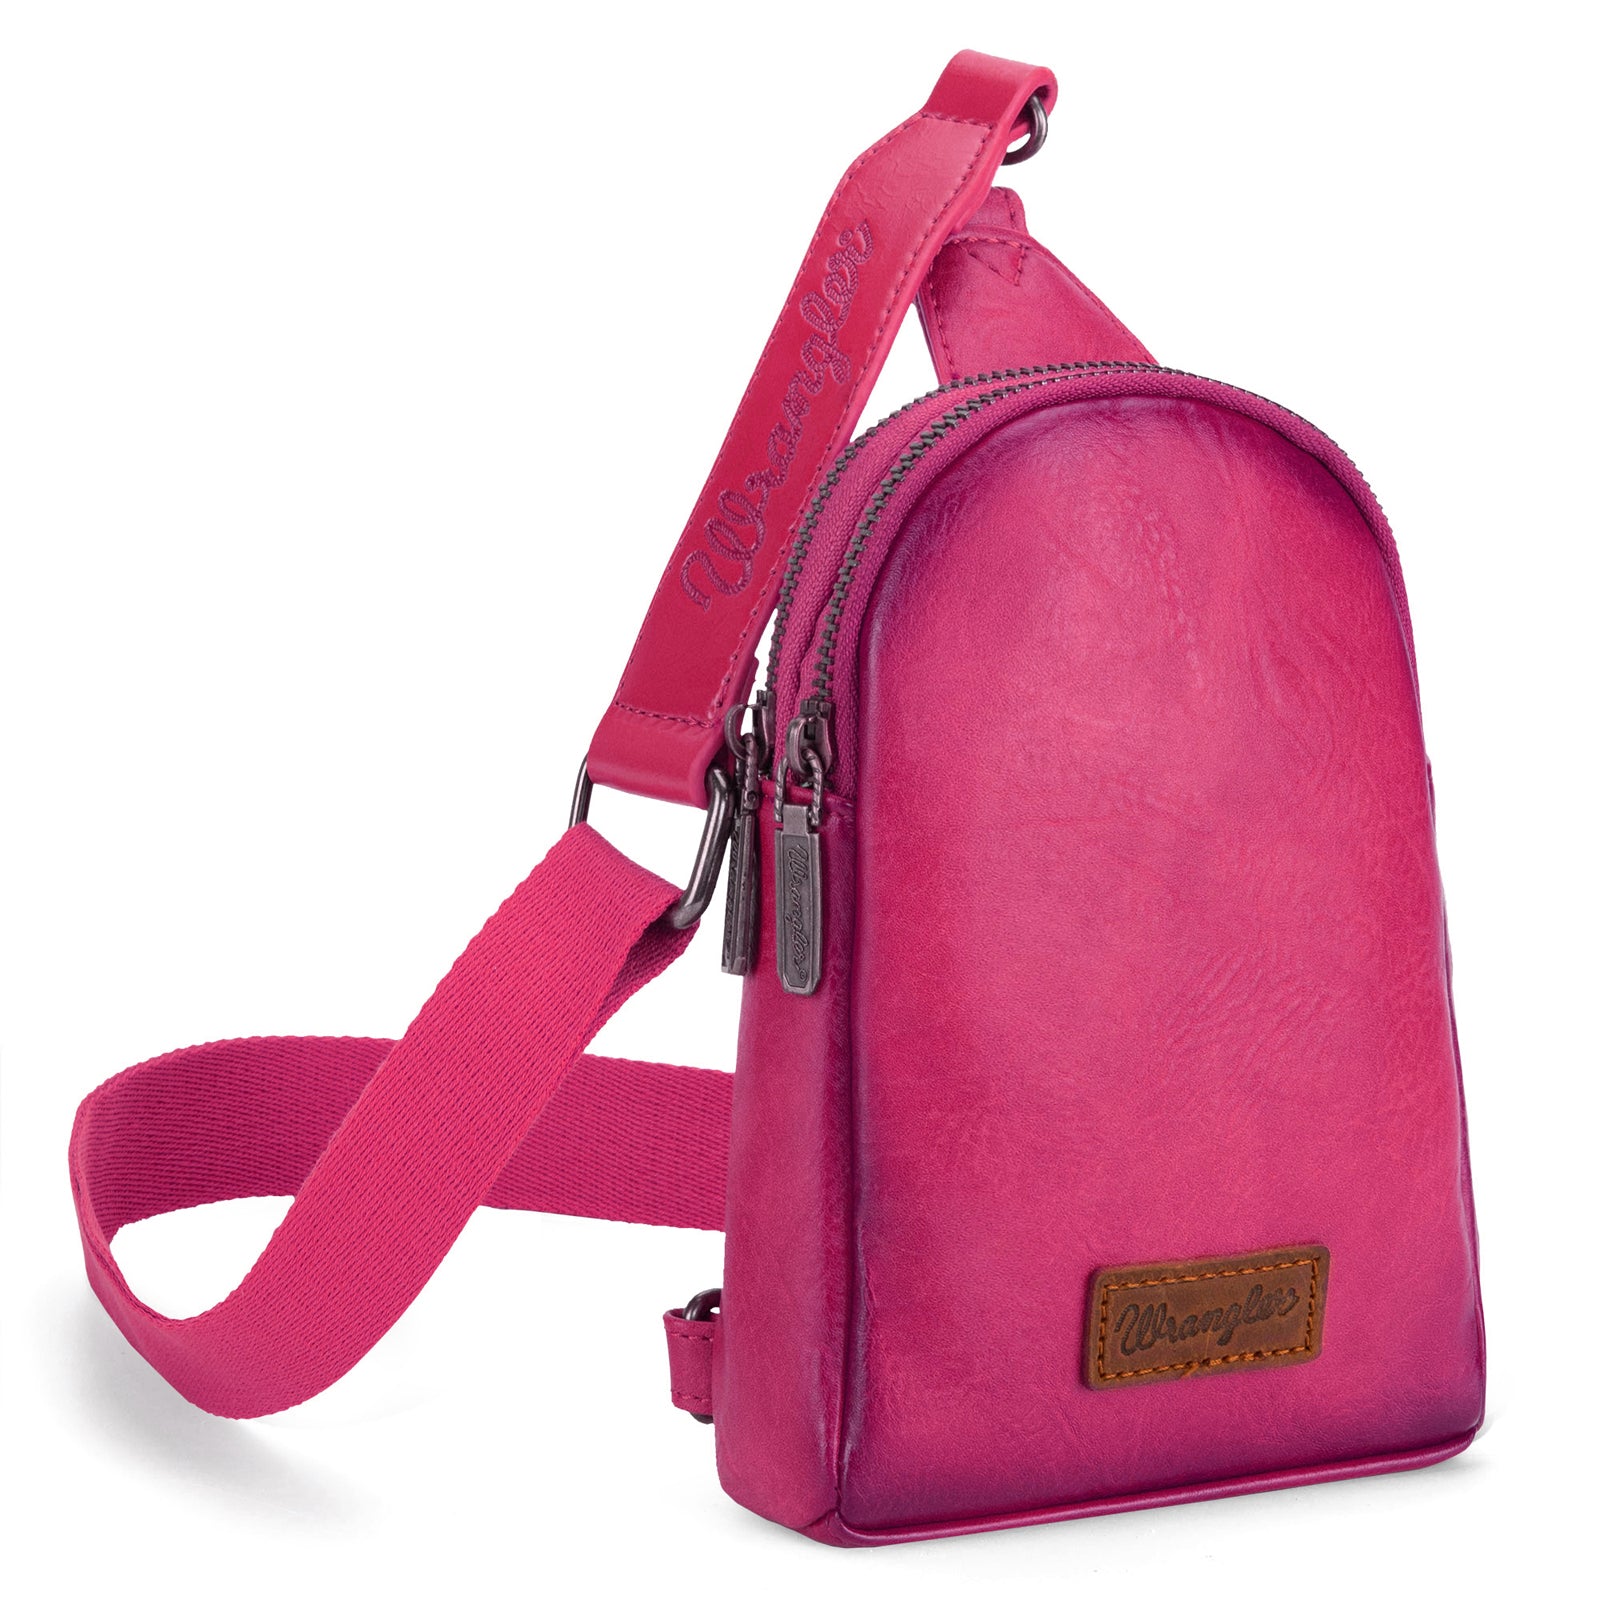 Small Leather Bag in Fuchsia Pink. Cross Body Shoulder Bag or 